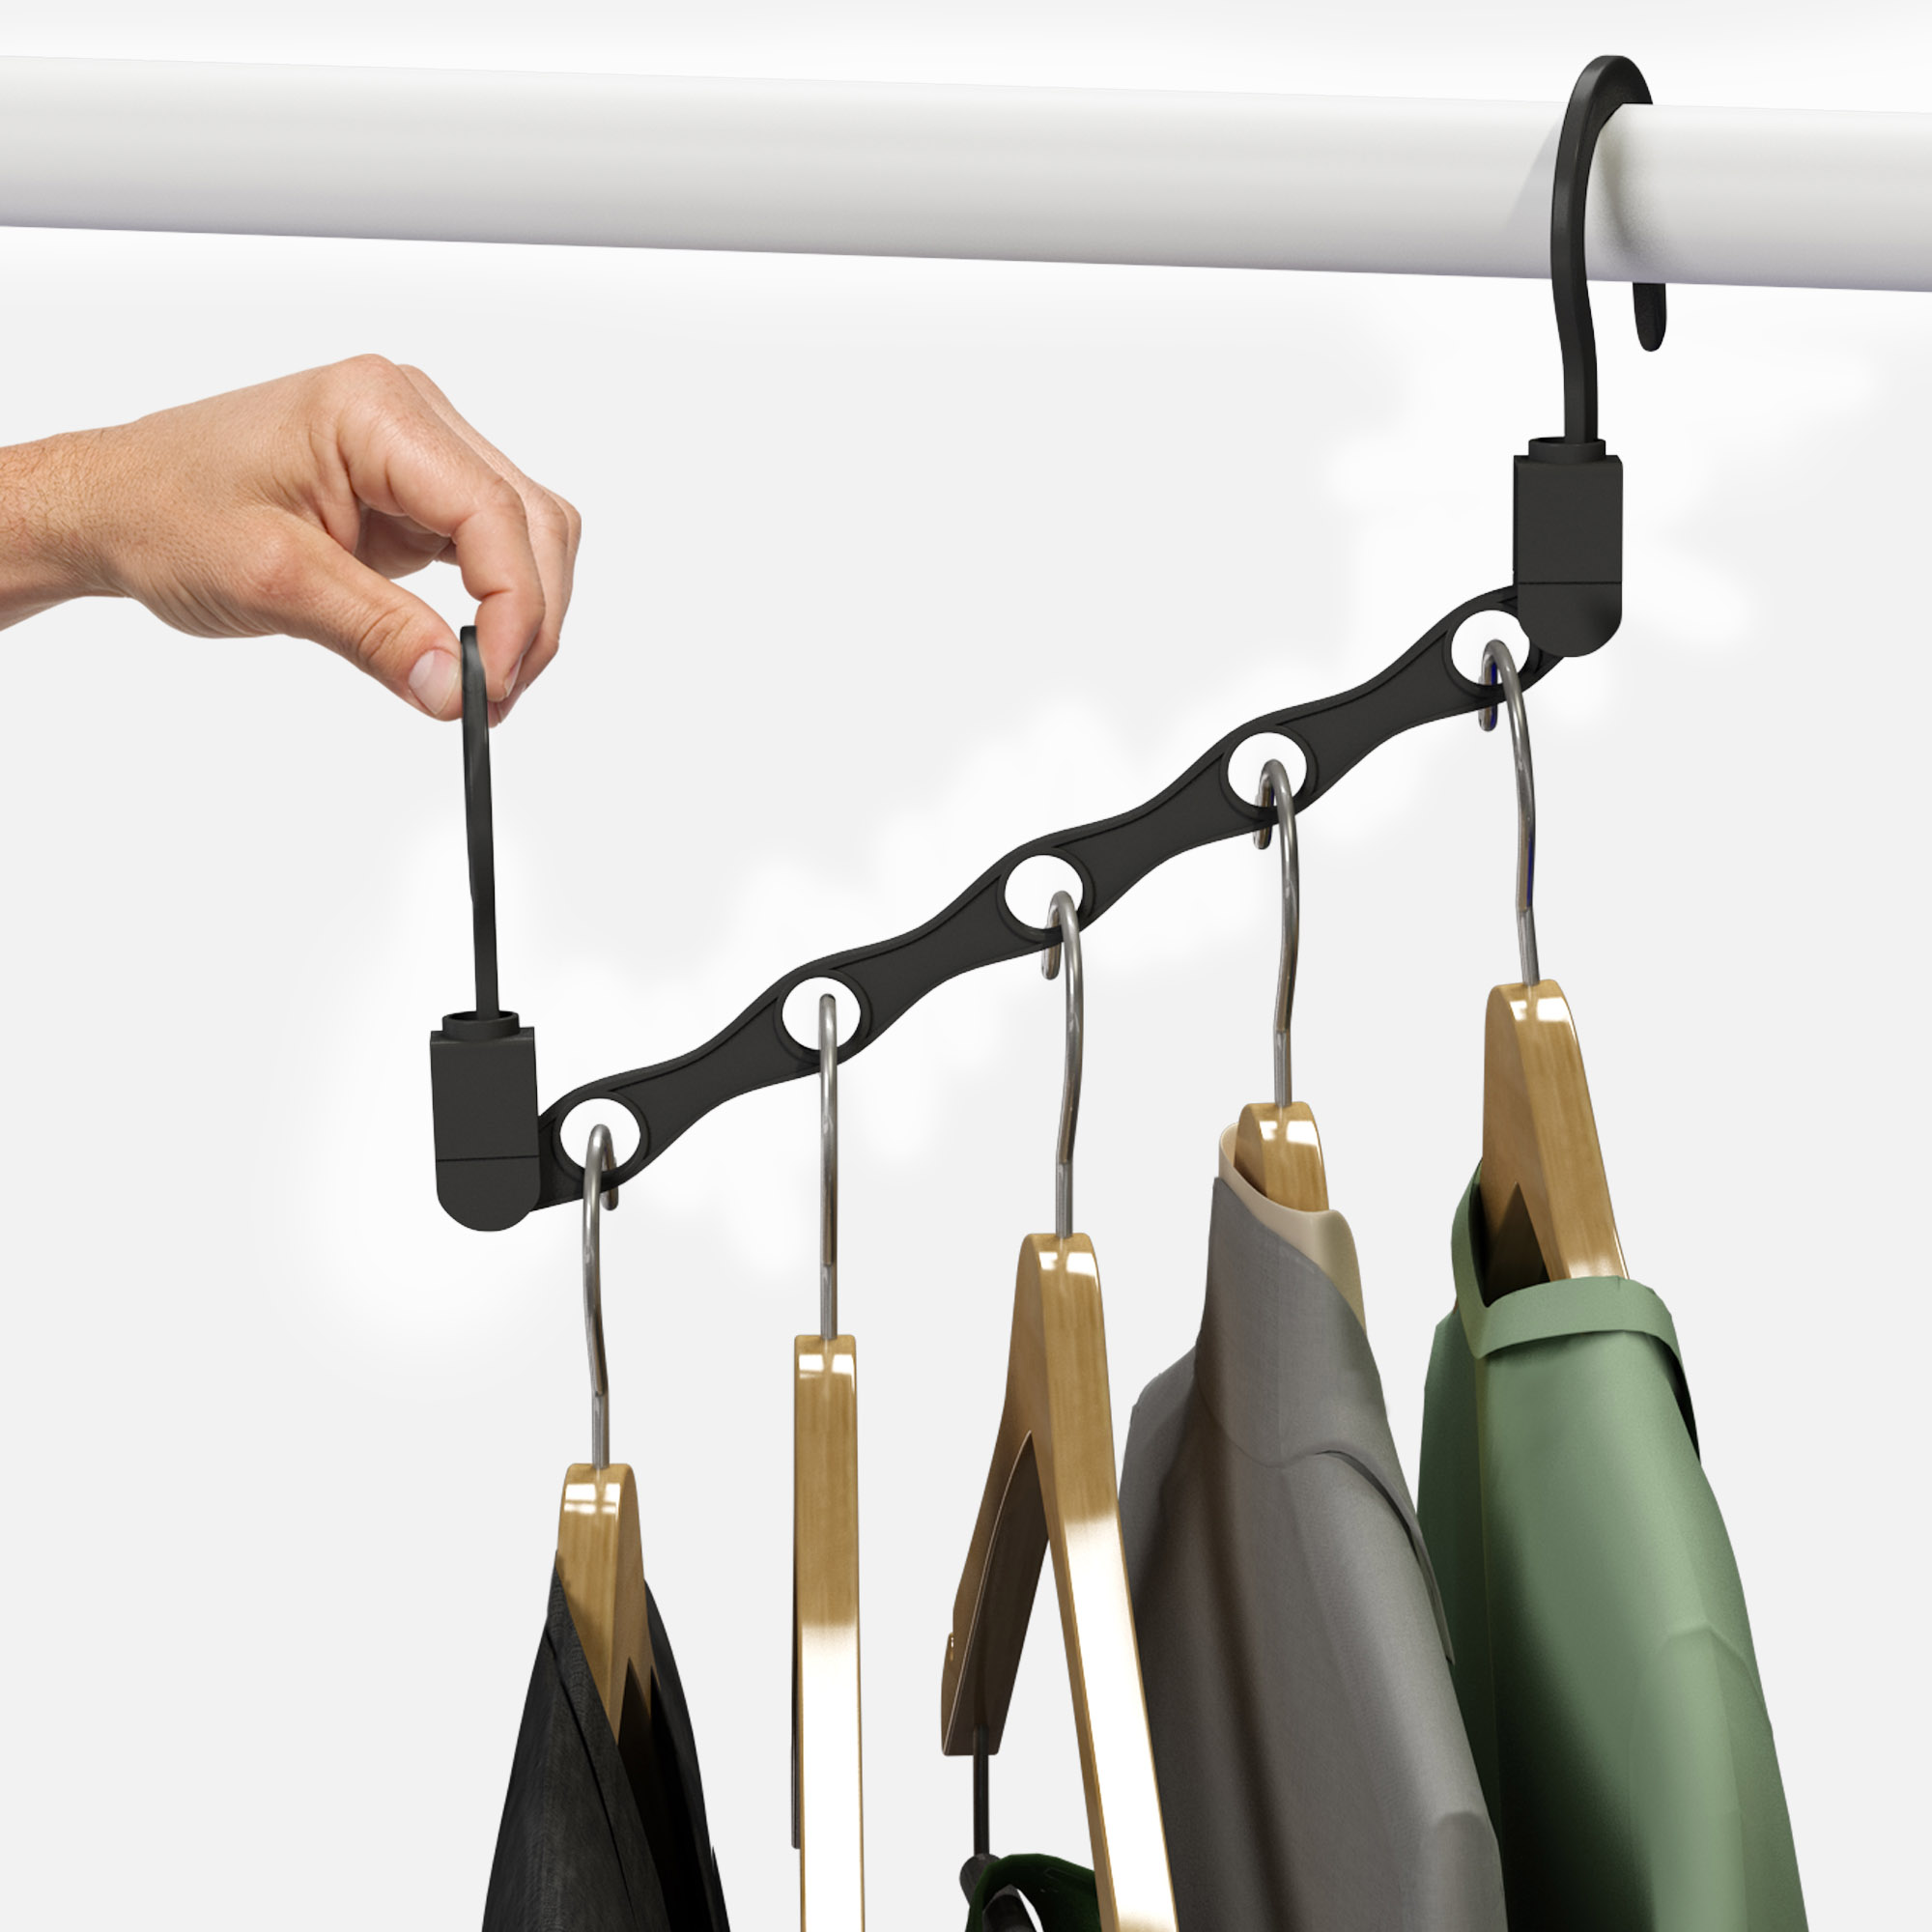 Space Saving Closet Organization Vertical and Horizontal Multi Hanger for Shirts, Pants, and Coats, All Your Dorm Room Essentials by Everyday Home - image 4 of 6